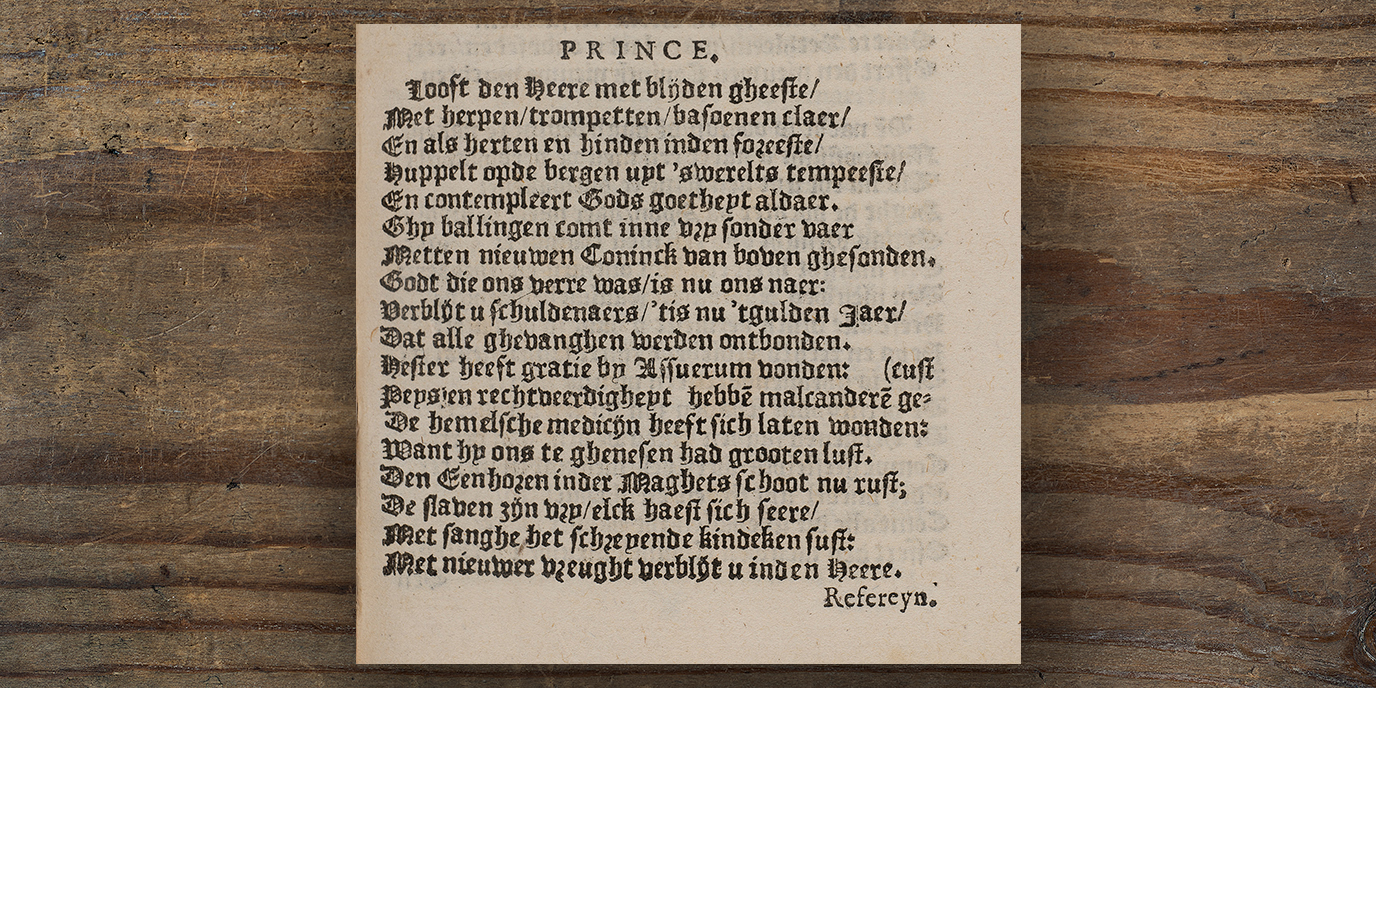 In the prince stanza, the ‘I’ of the refrain urges the reader to praise God: ‘Praise the Lord with joyful spirit / With harps, trumpets and horns’.